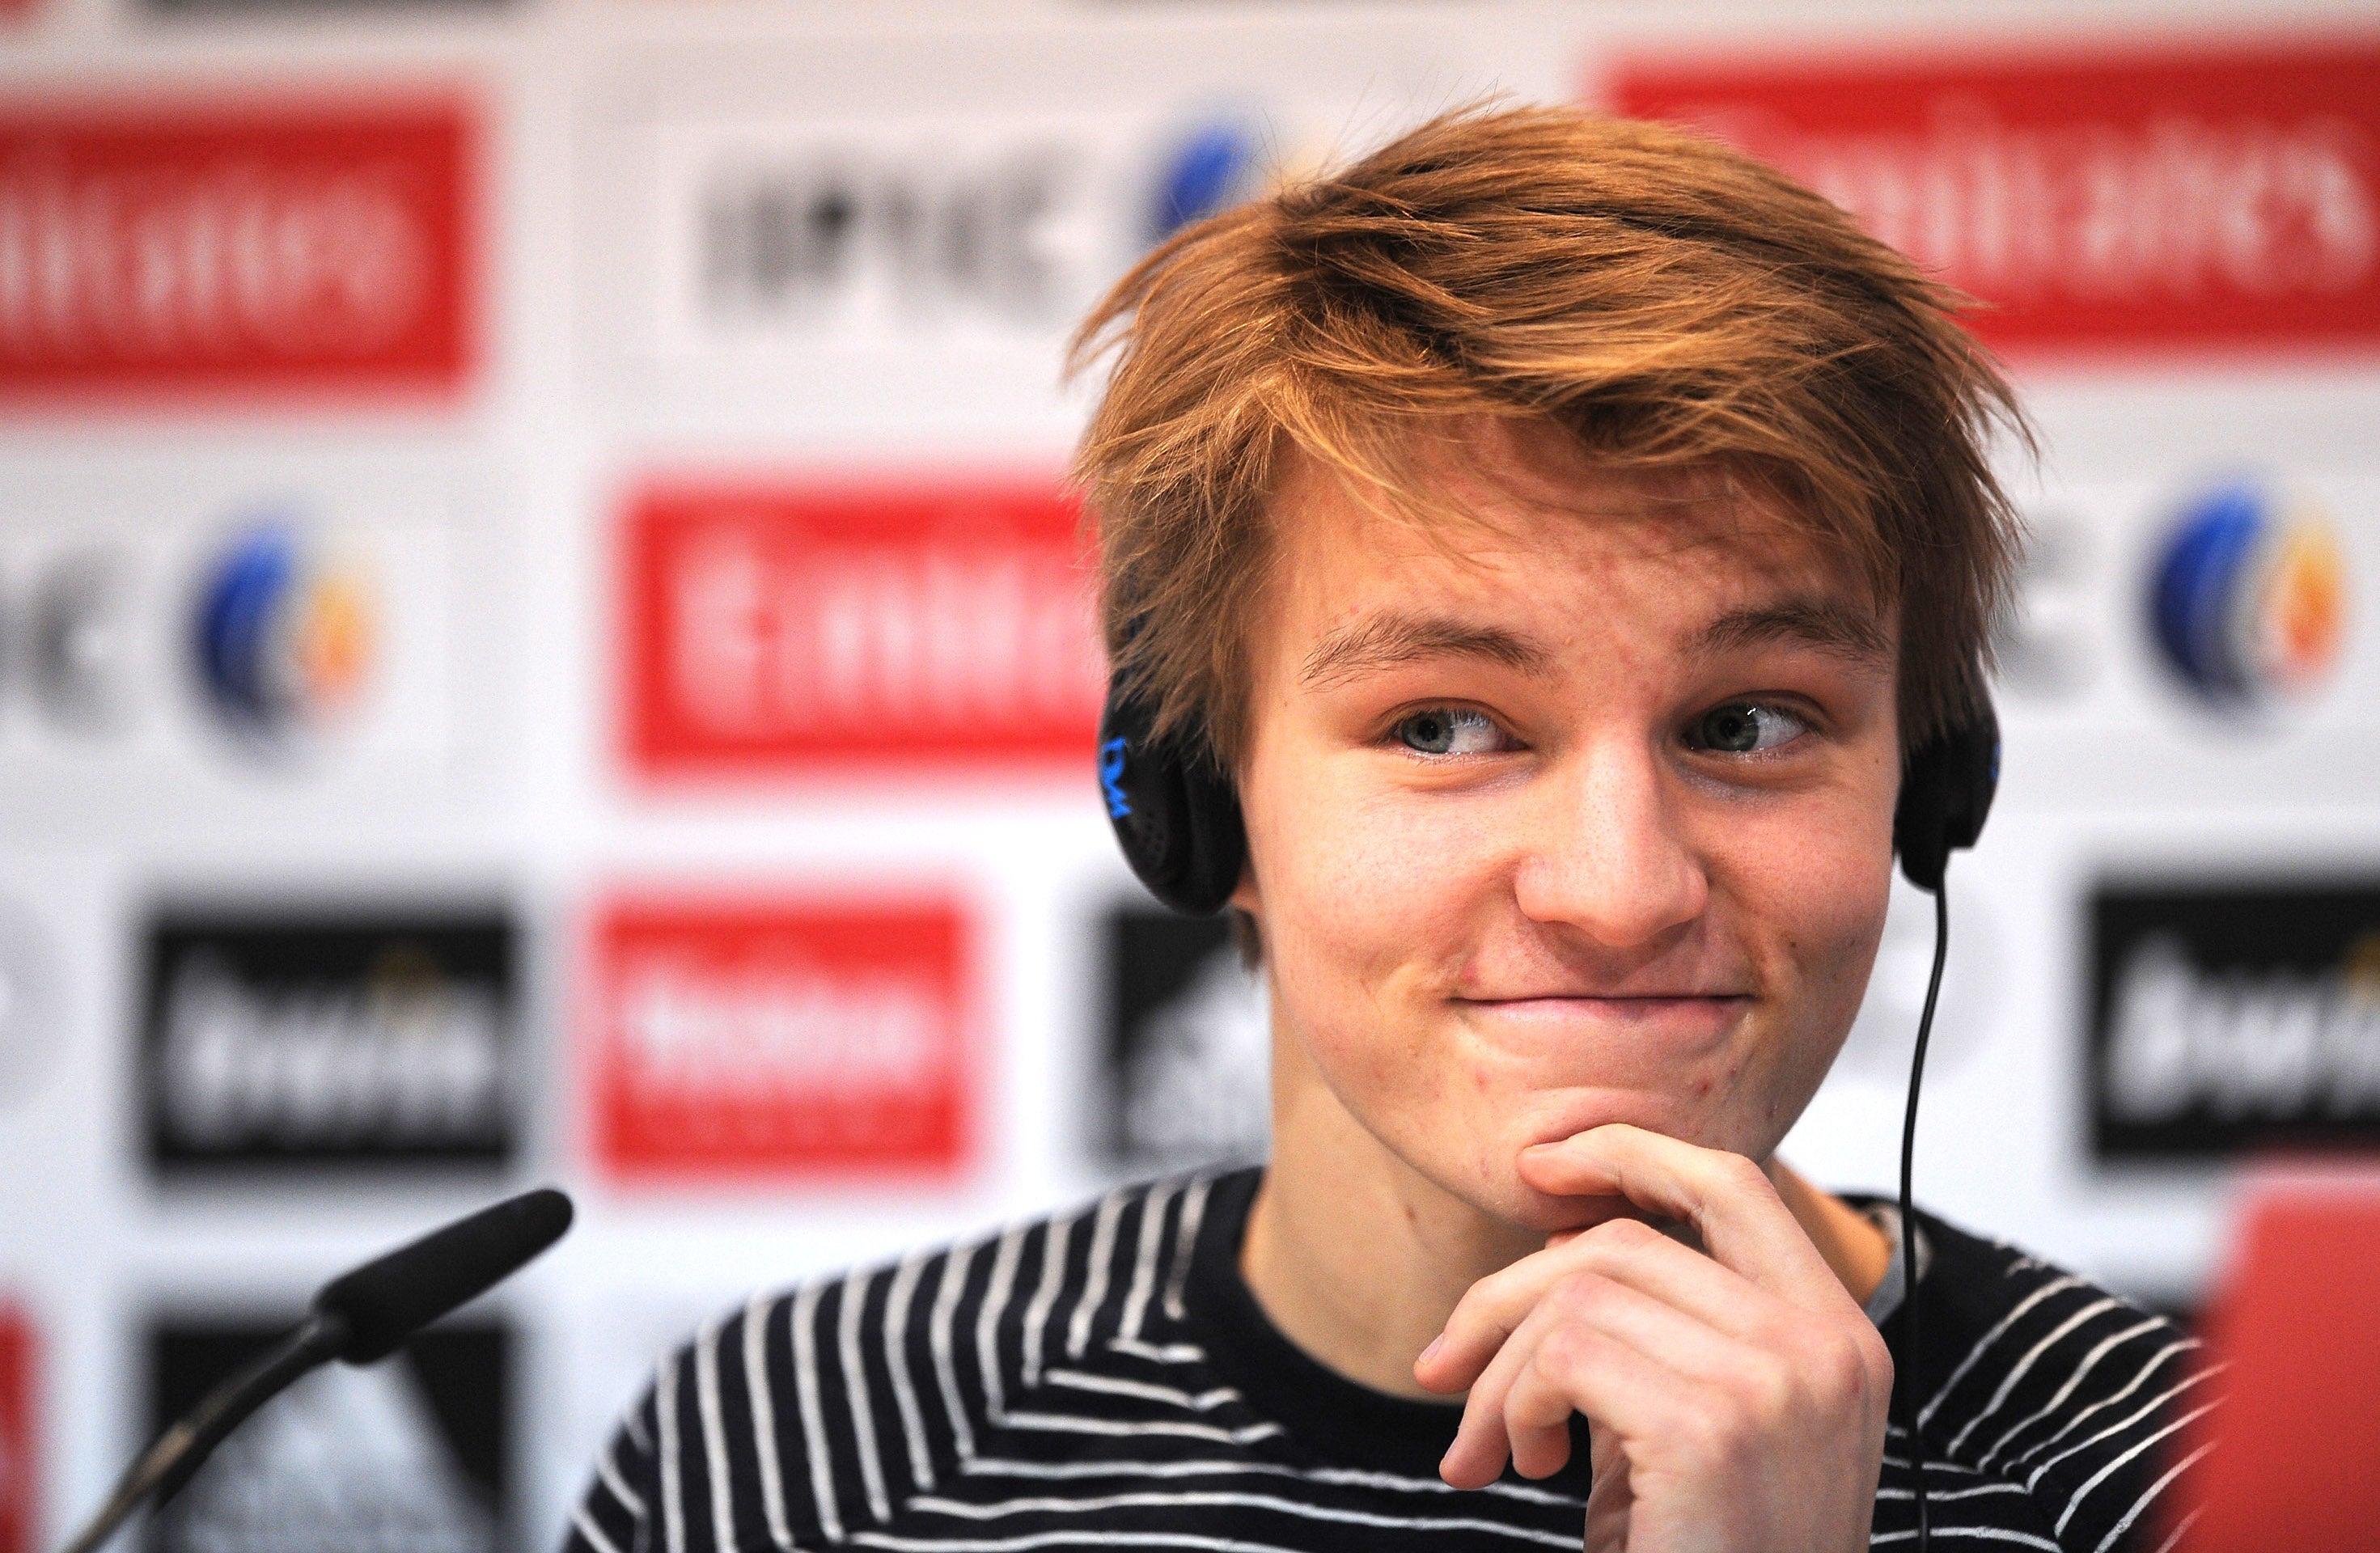 Martin Odegaard at his first press conference after joining Real Madrid